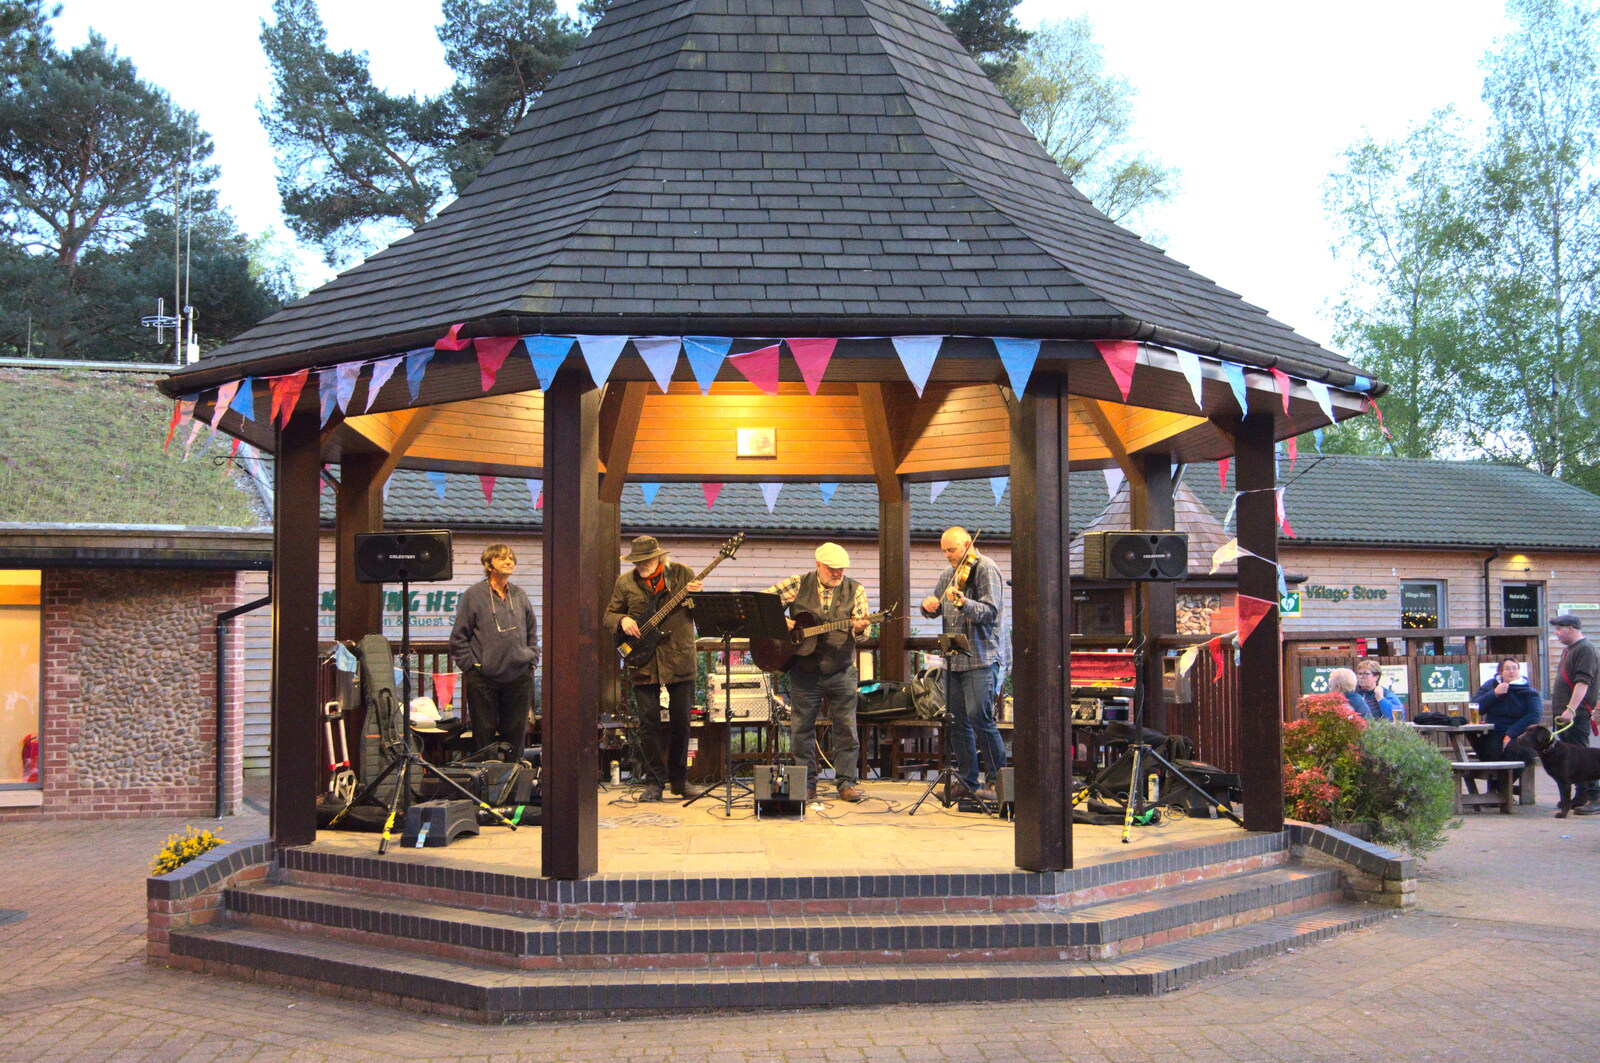 There's a band playing in the 'village square' from A Coronation Camping Picnic, Kelling Heath, Norfolk - 6th May 2023